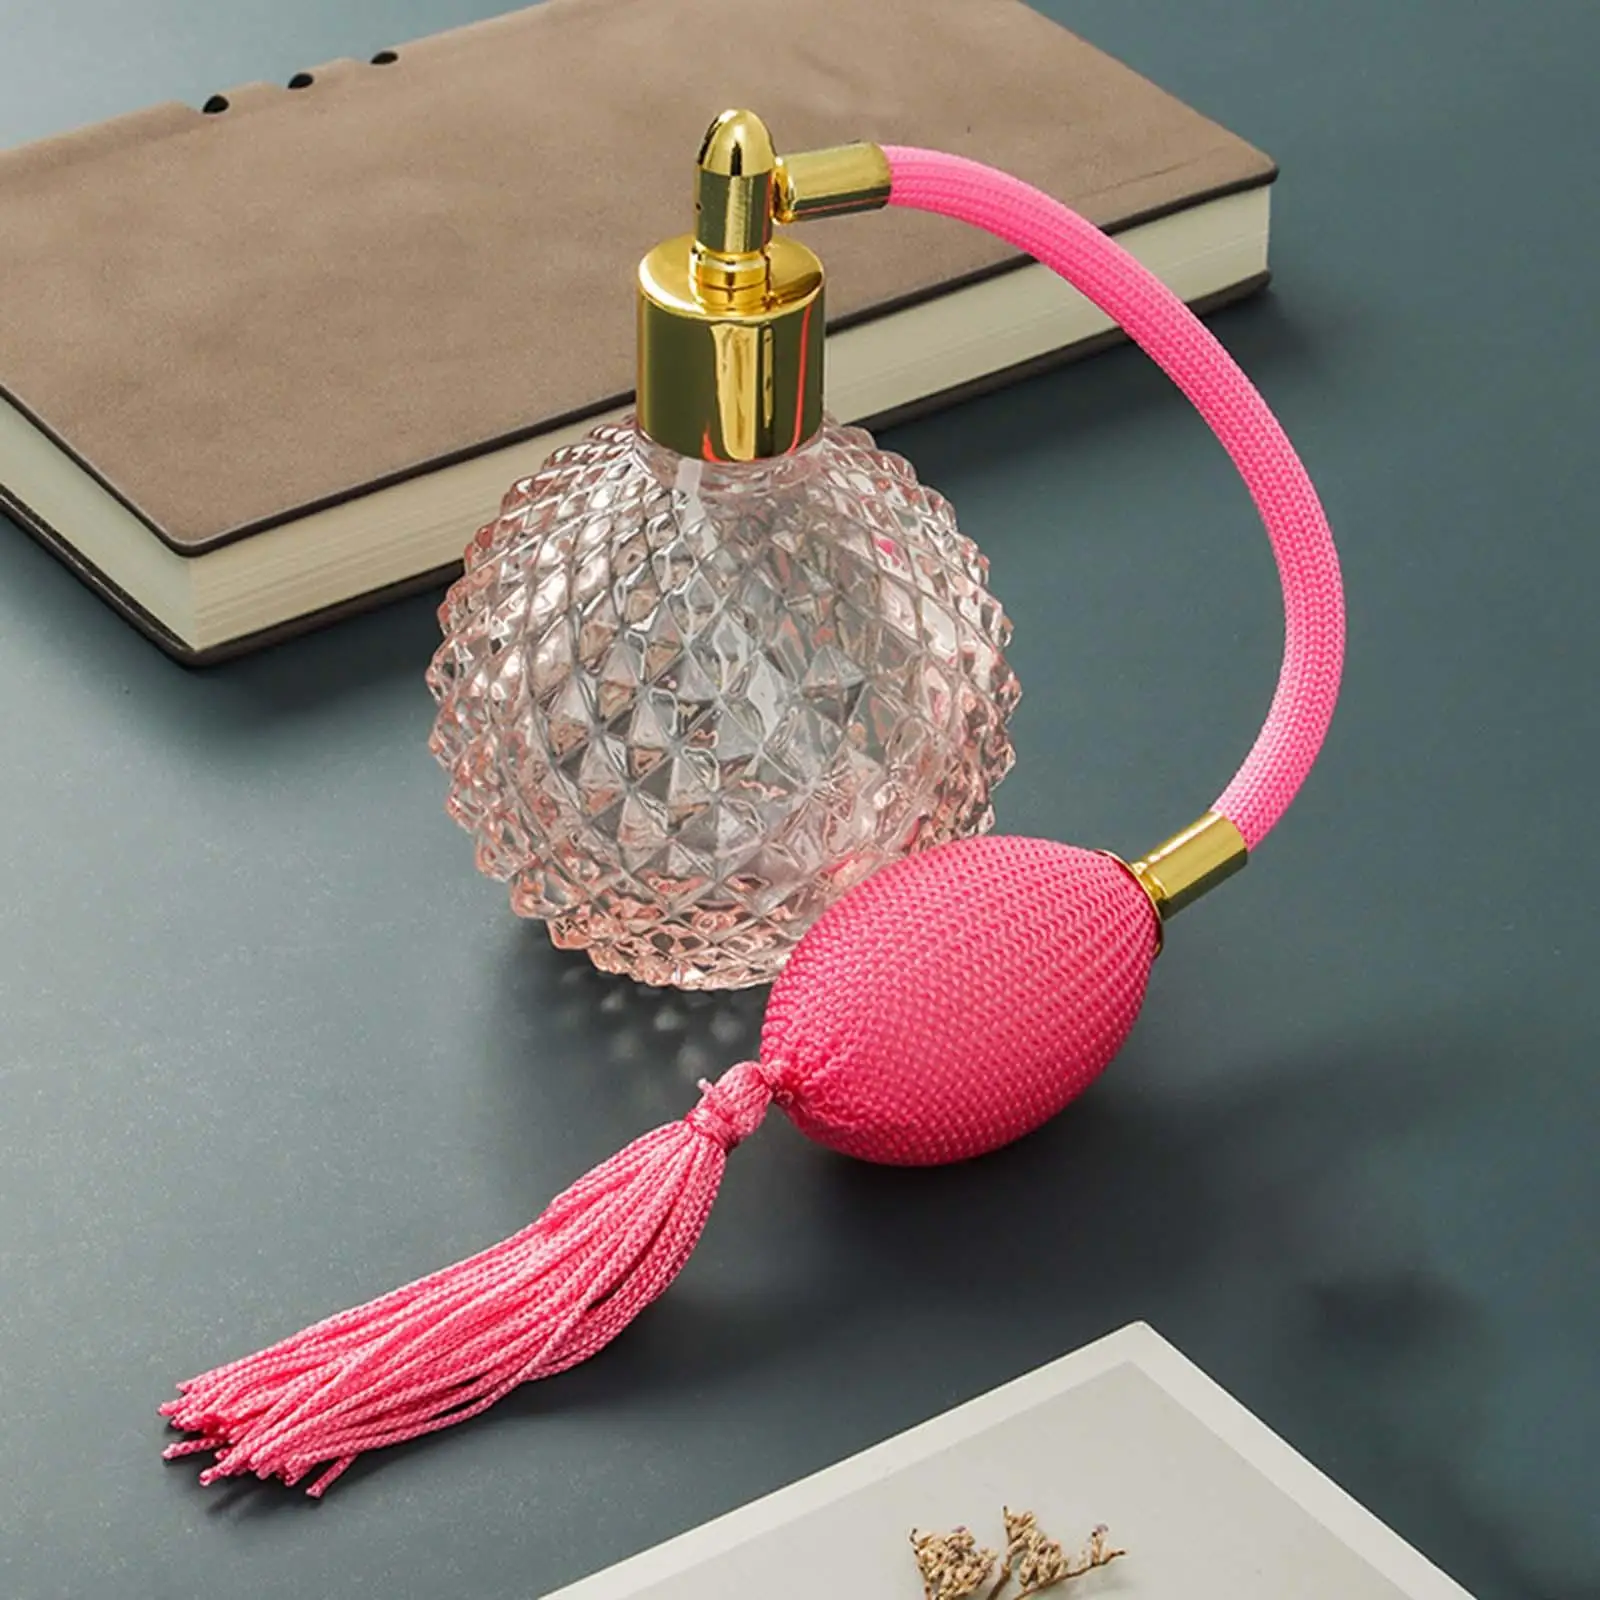 Vintage Perfume Bottle Spray Perfume Bottle Lightweight Durable with Long Tassel 100ml Portable Glass Makeup Tool Container